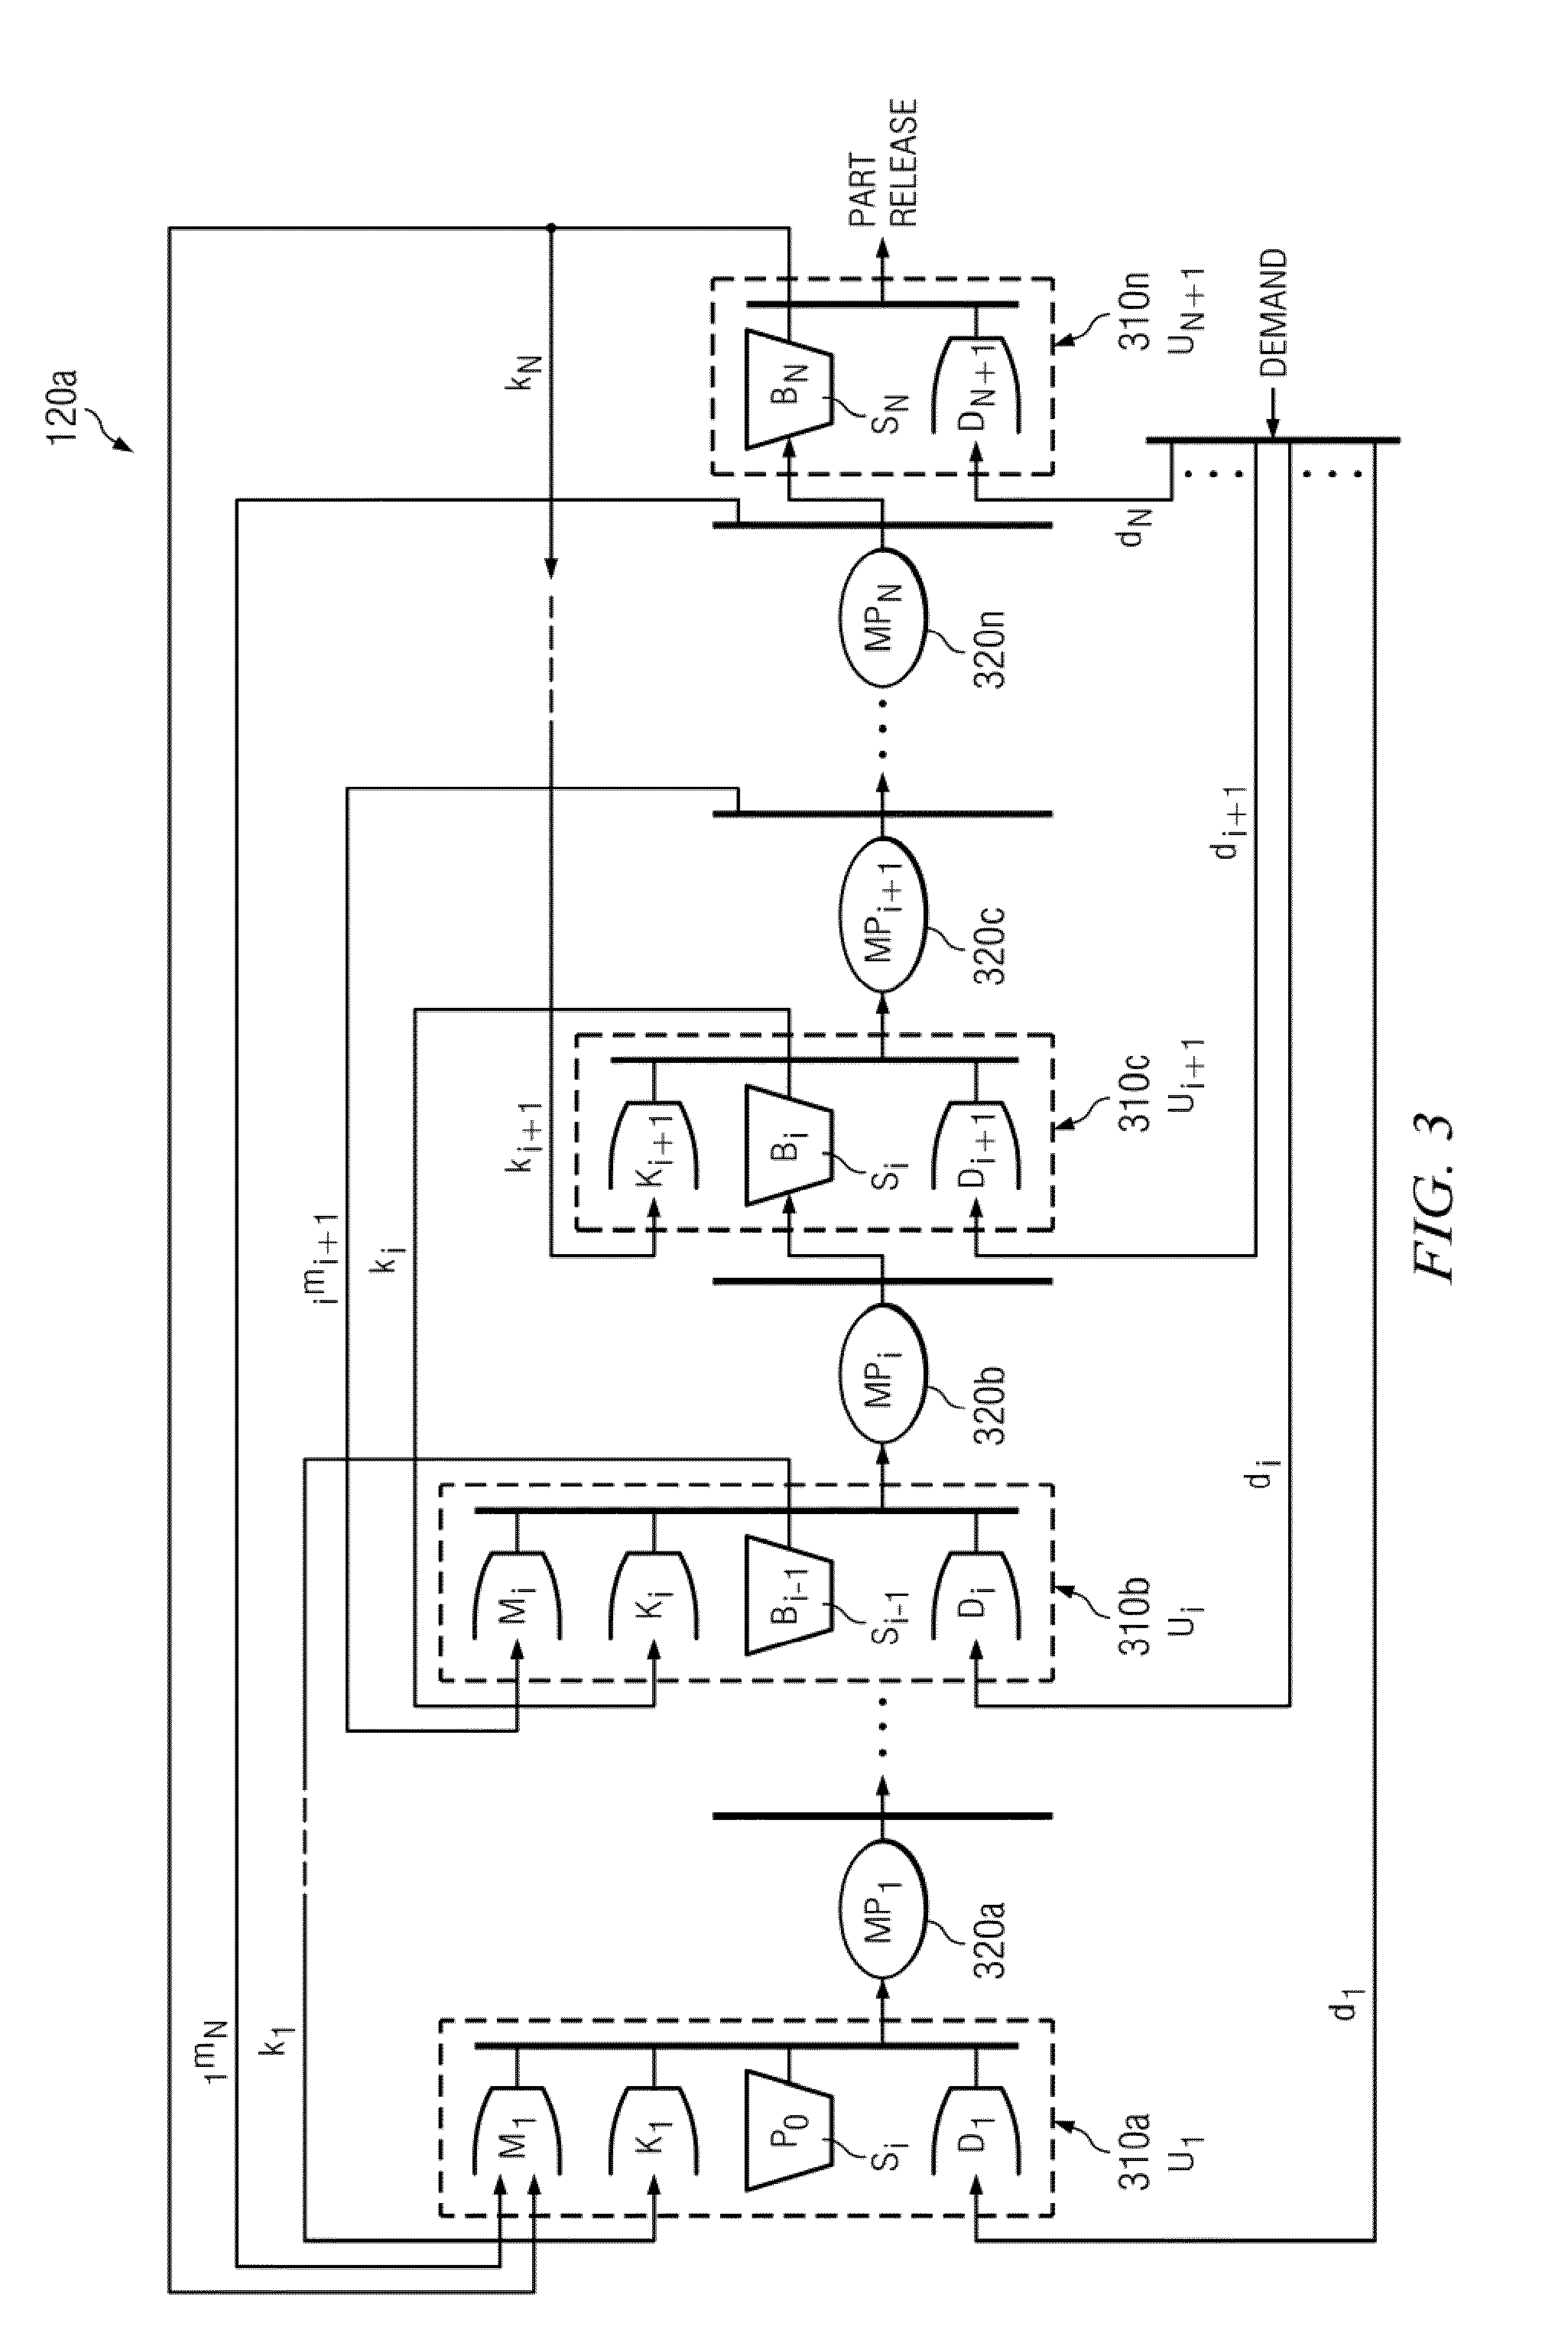 System and Method for a Demand Driven Lean Production Control System